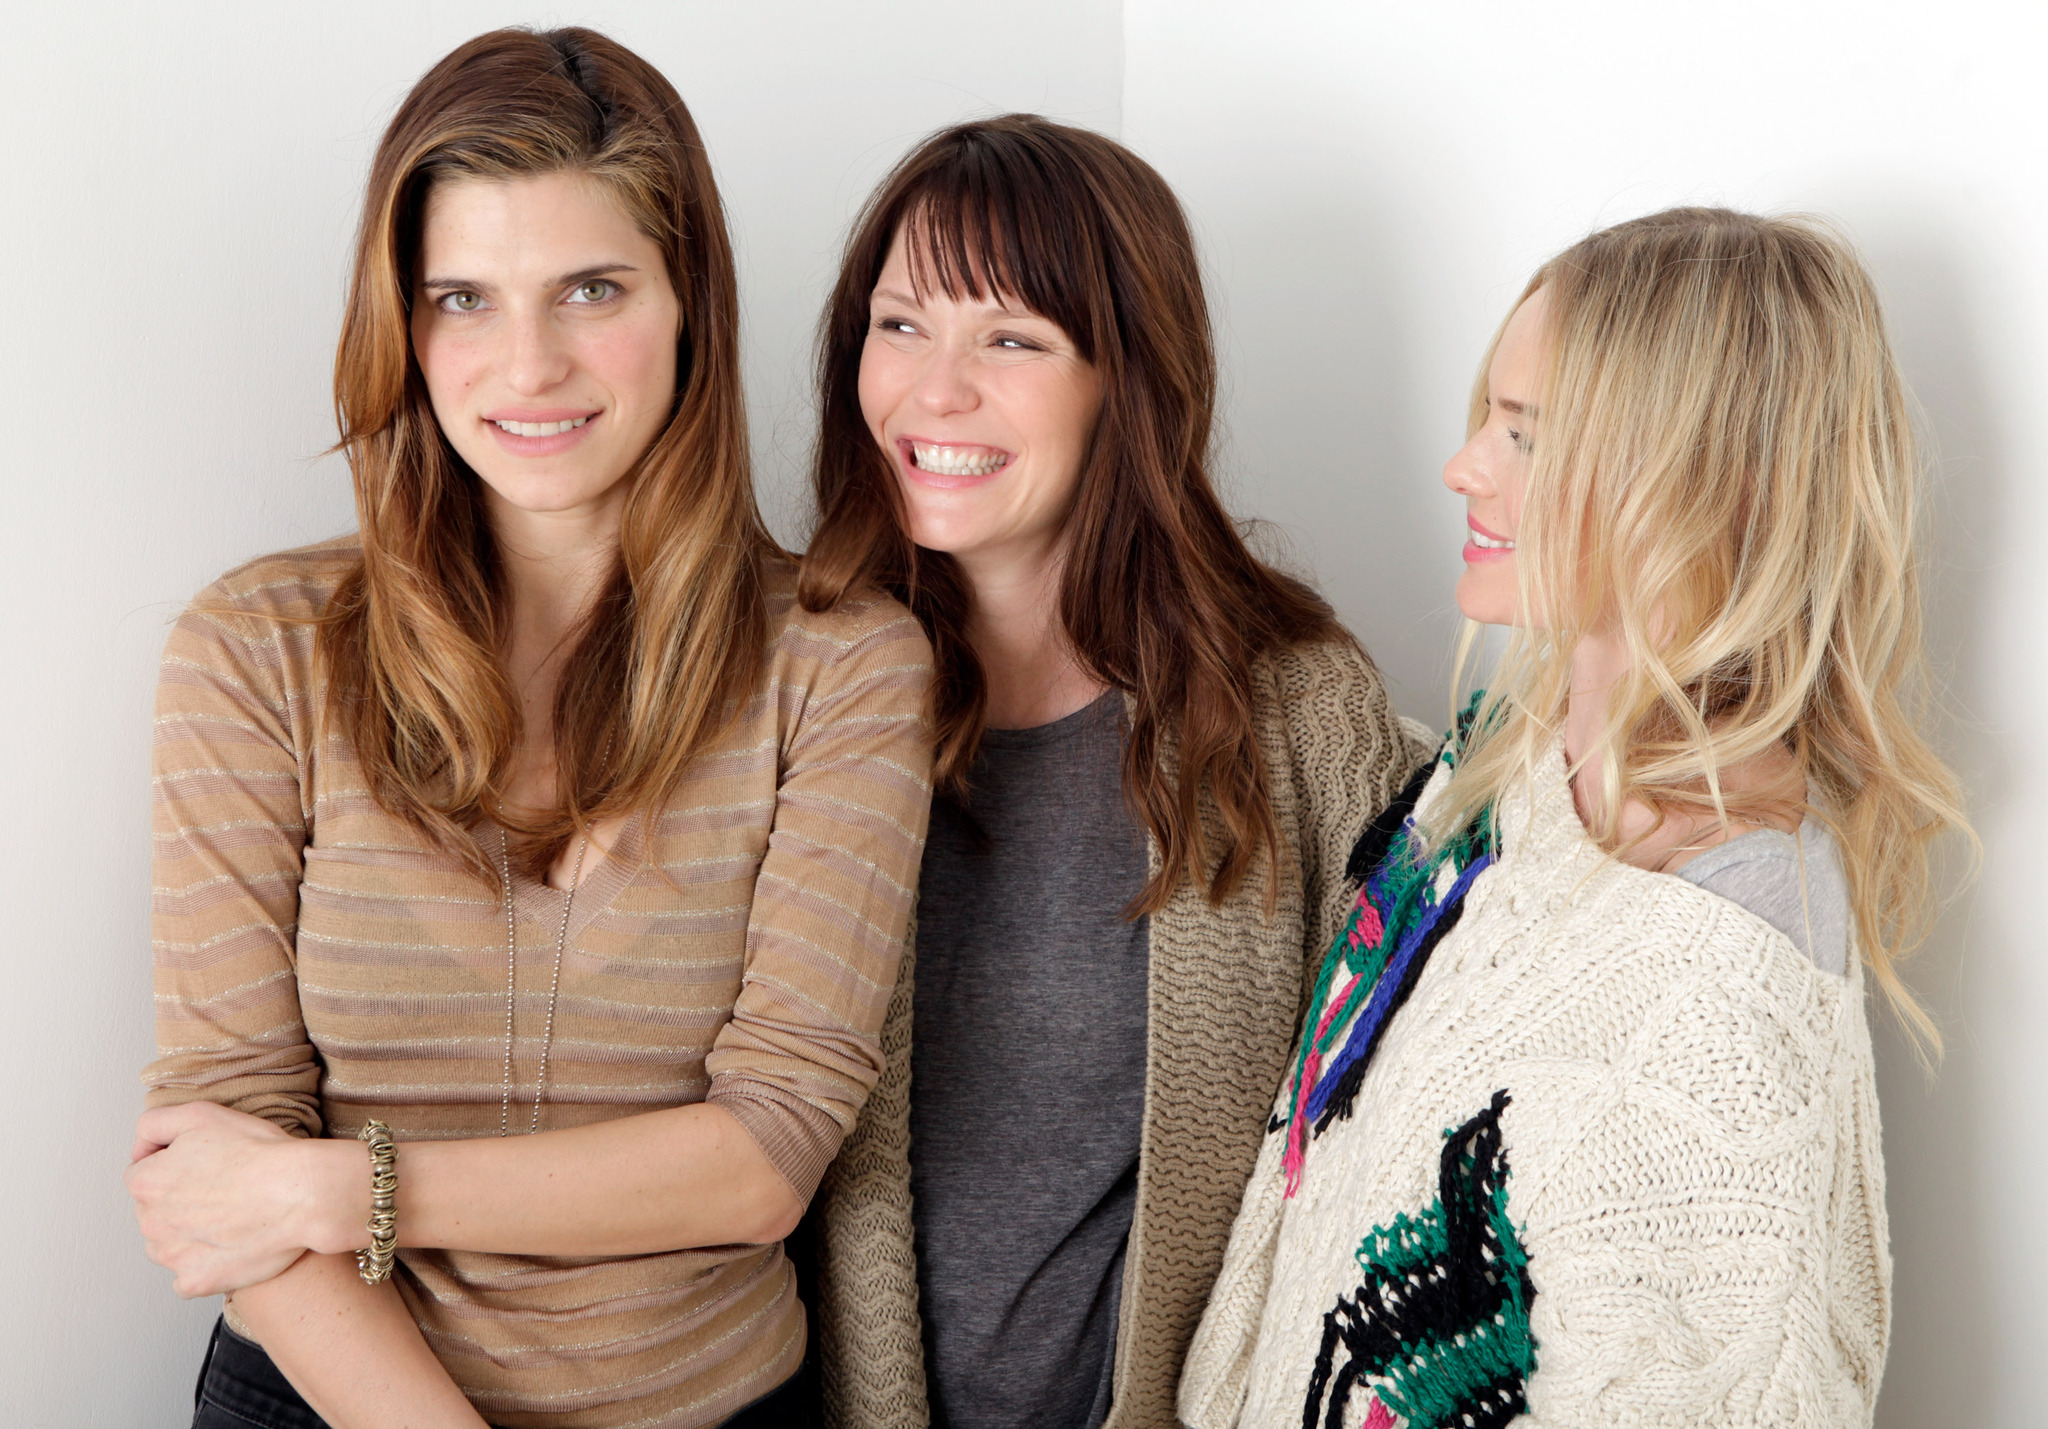 Kate Bosworth, Katie Aselton and Lake Bell